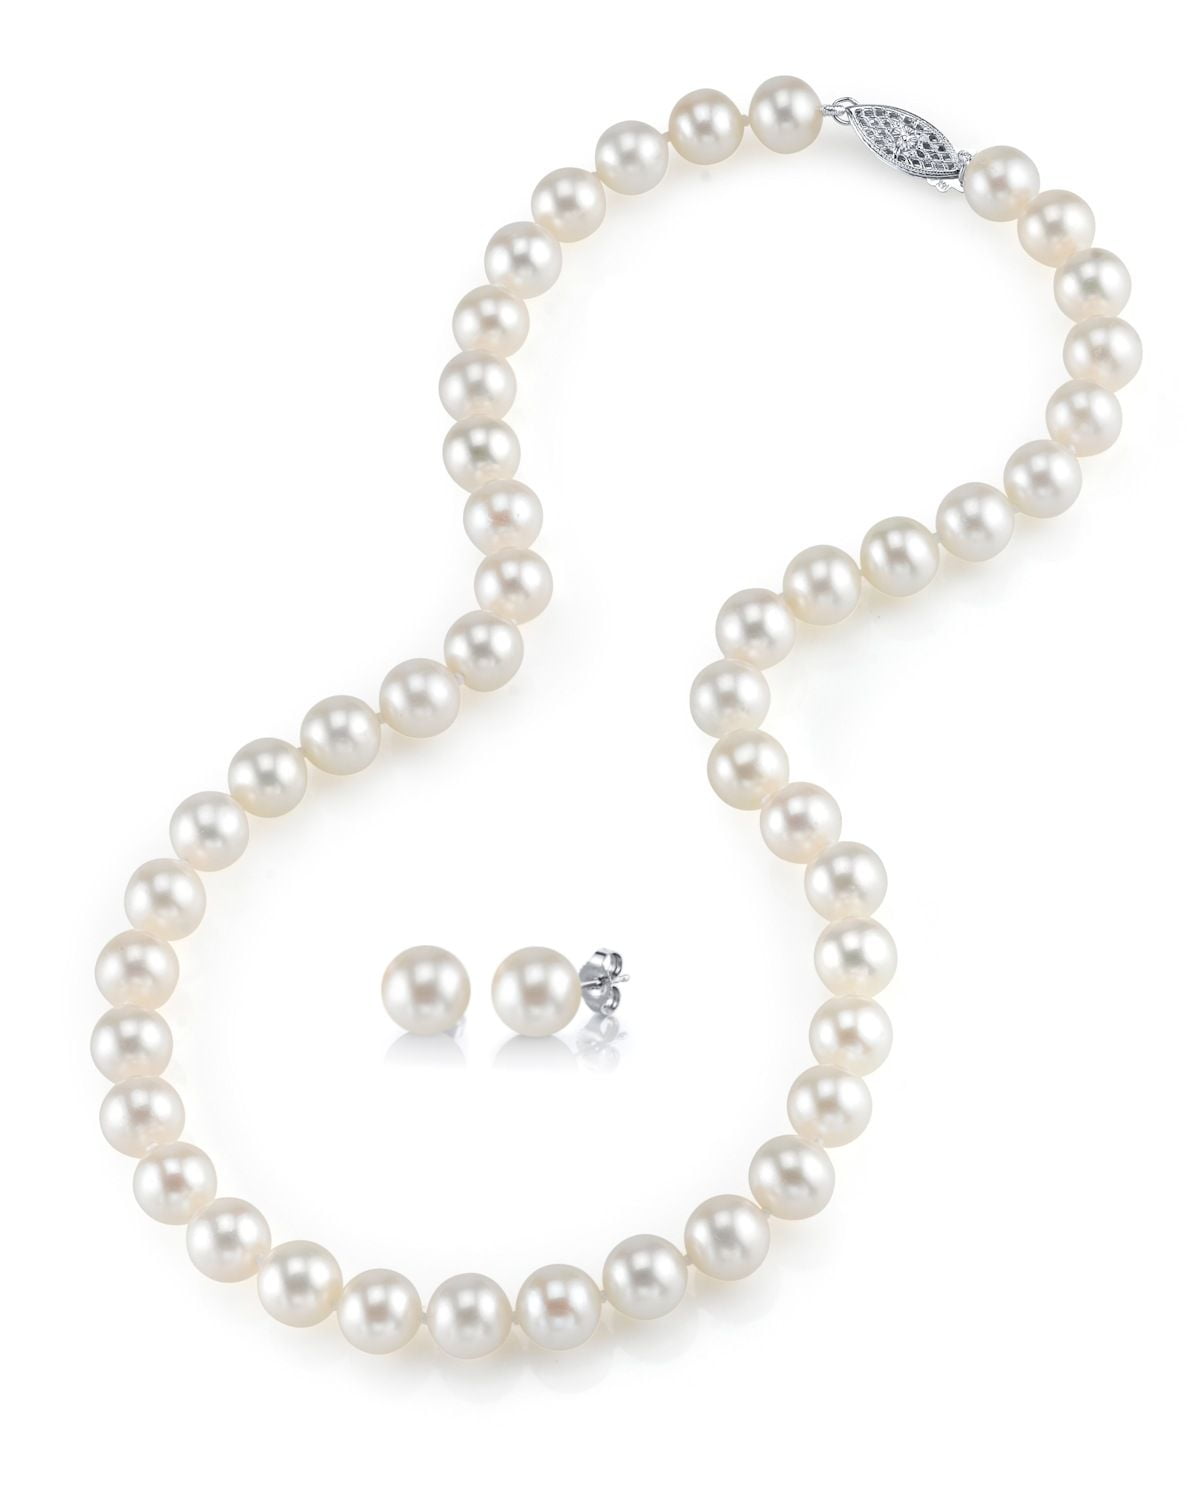 Tin Cup Freshwater White Illusion Pearl Necklace Bracelet SET 18" Inch Cultured